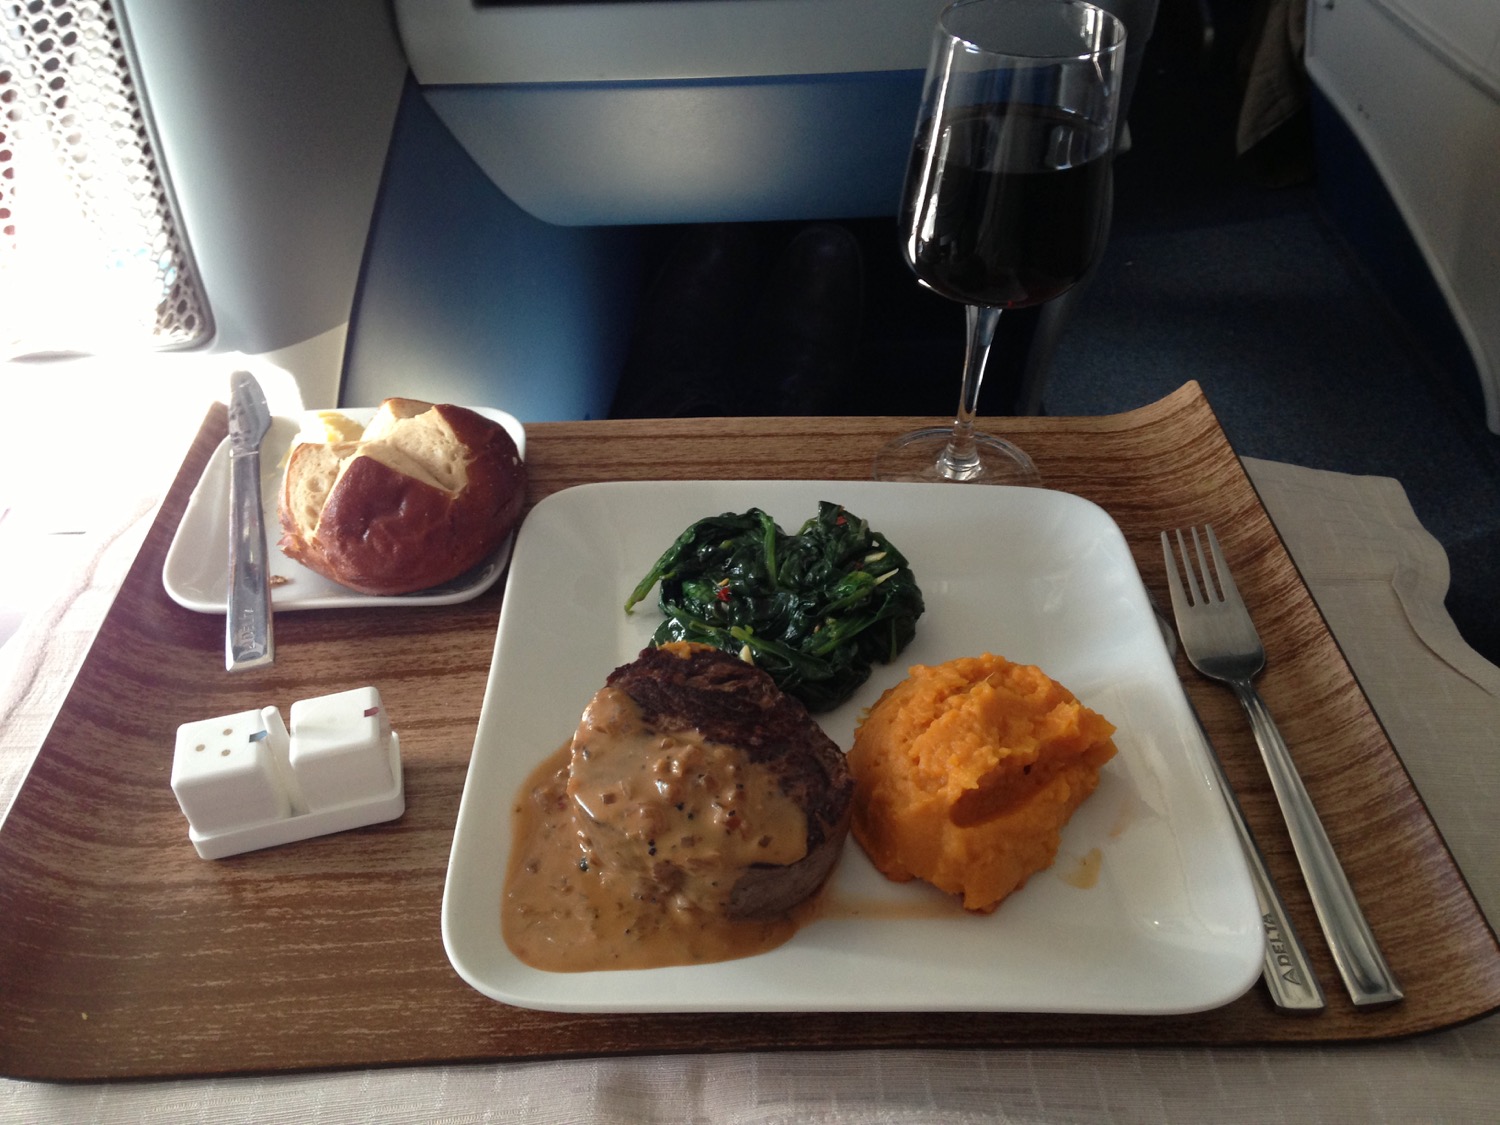 Delta One Business Class Meal - 9